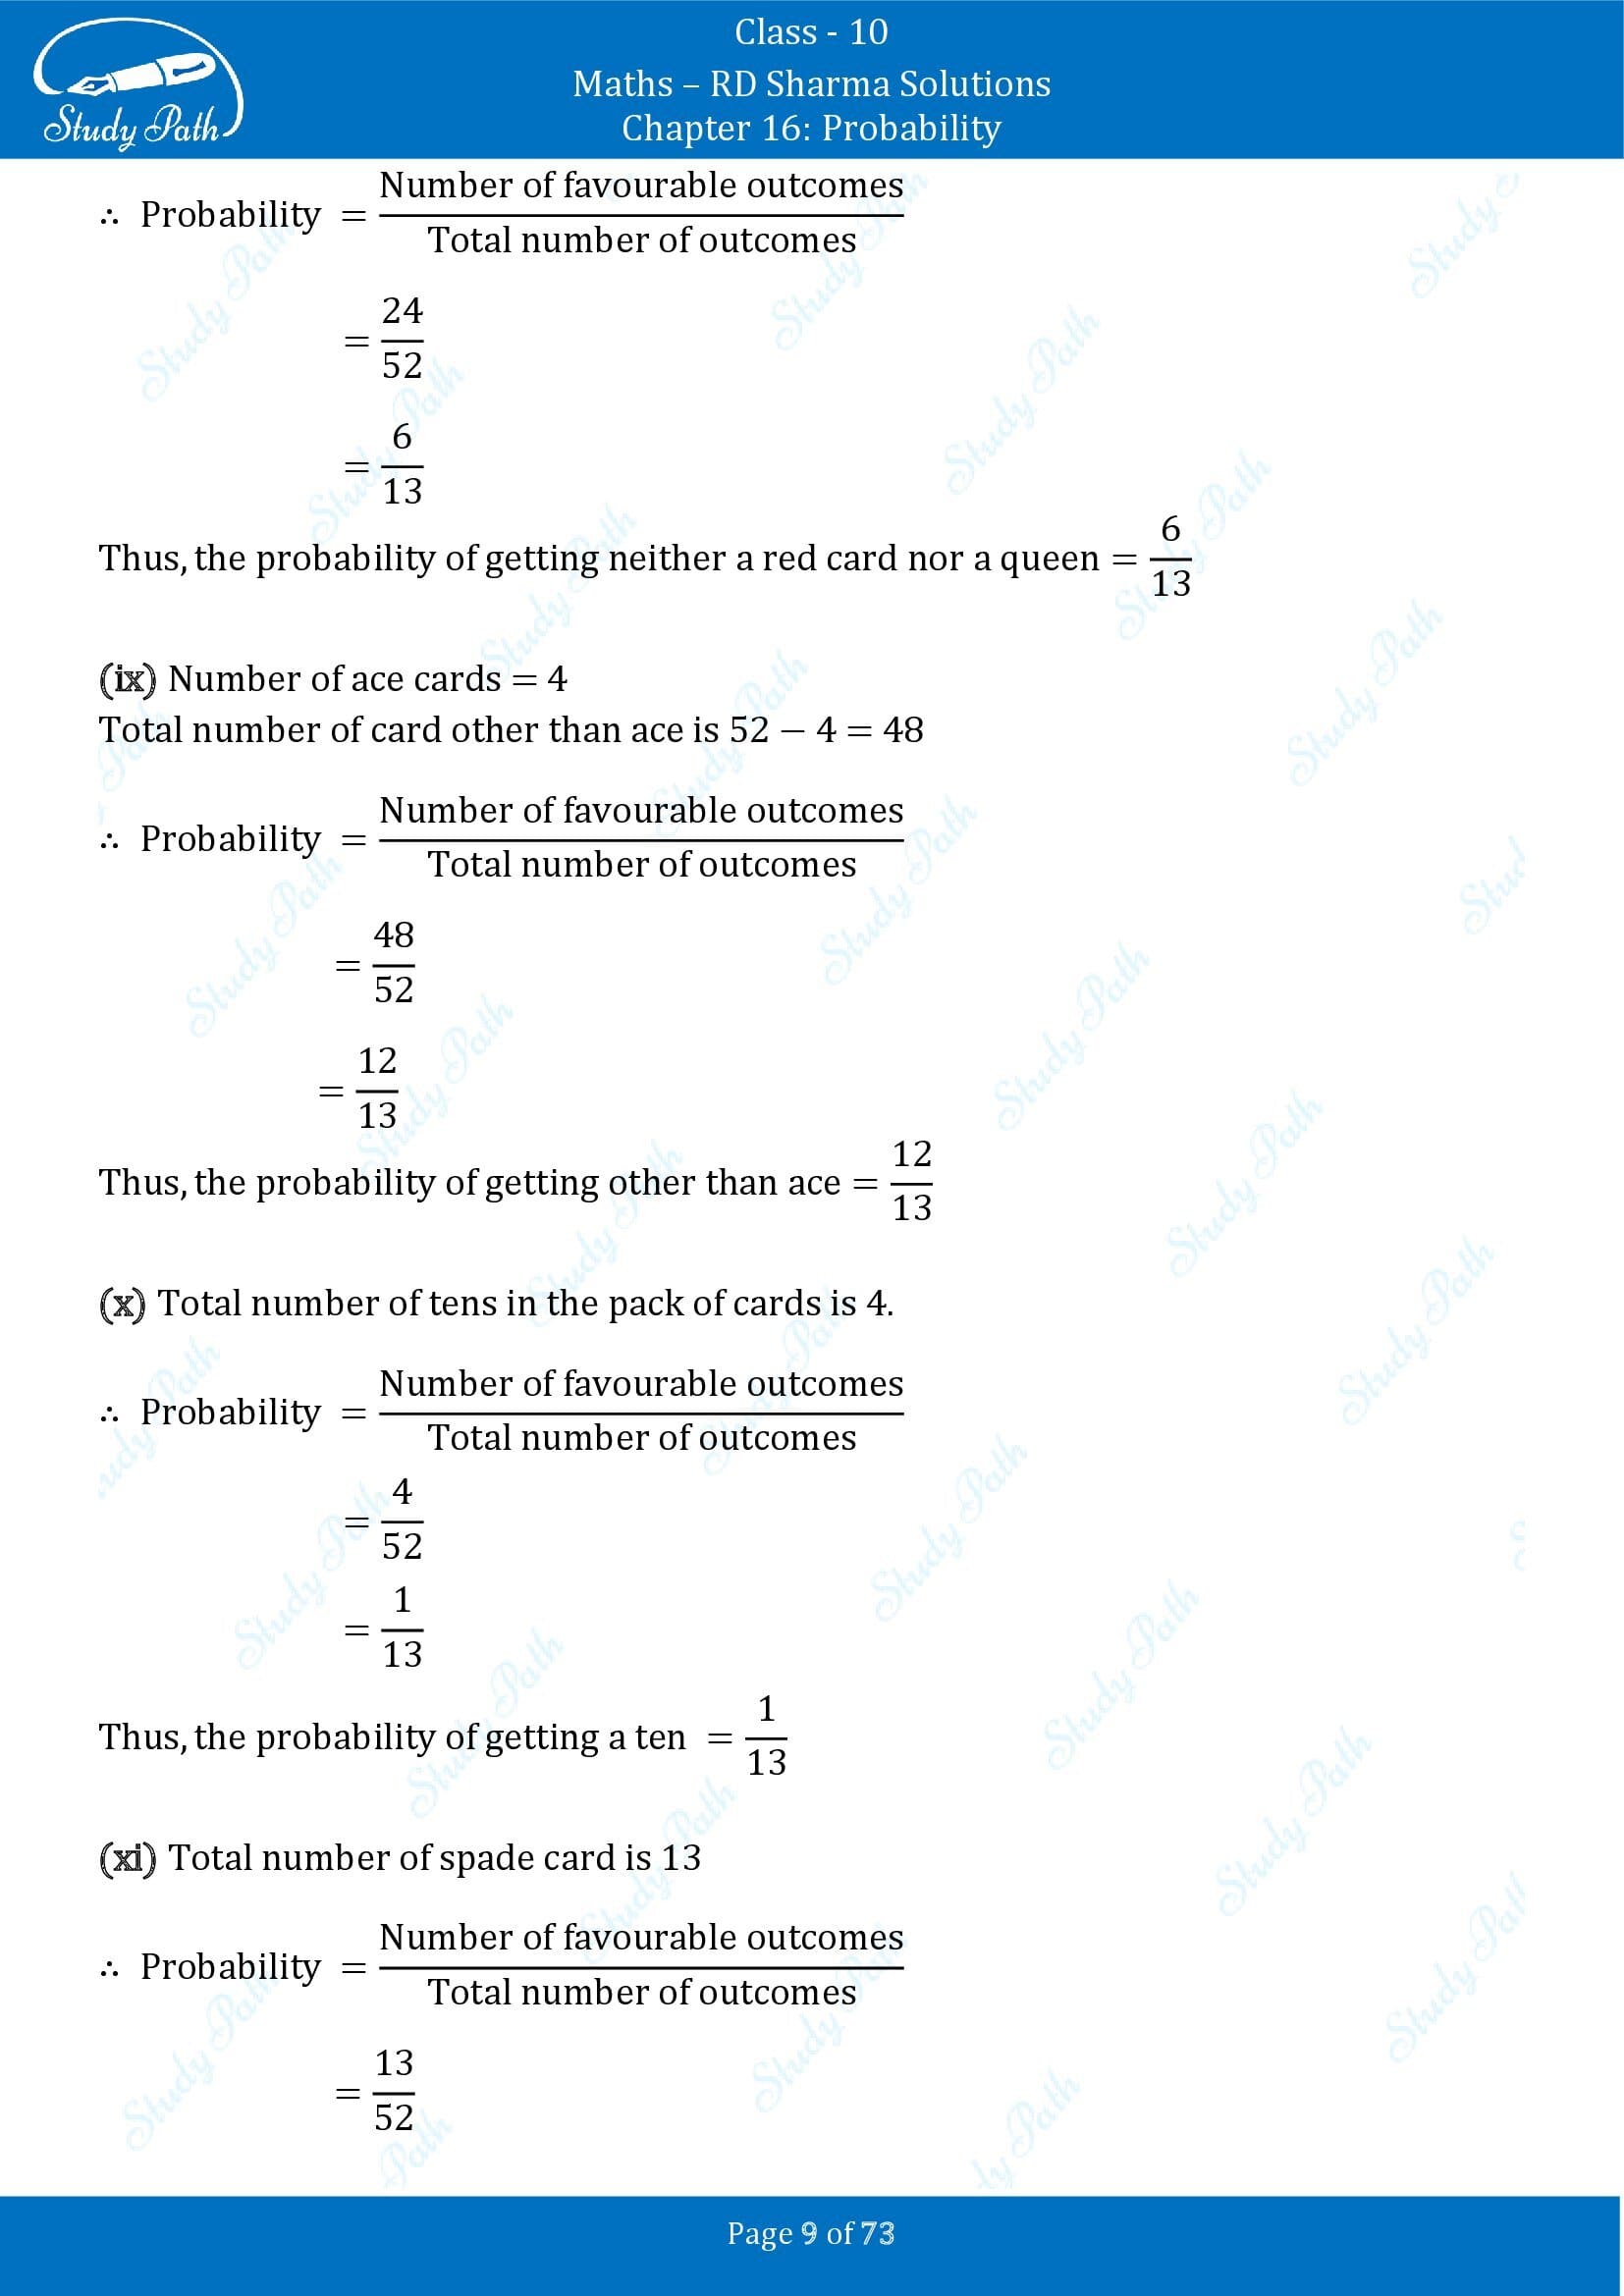 RD Sharma Solutions Class 10 Chapter 16 Probability Exercise 16.1 00009